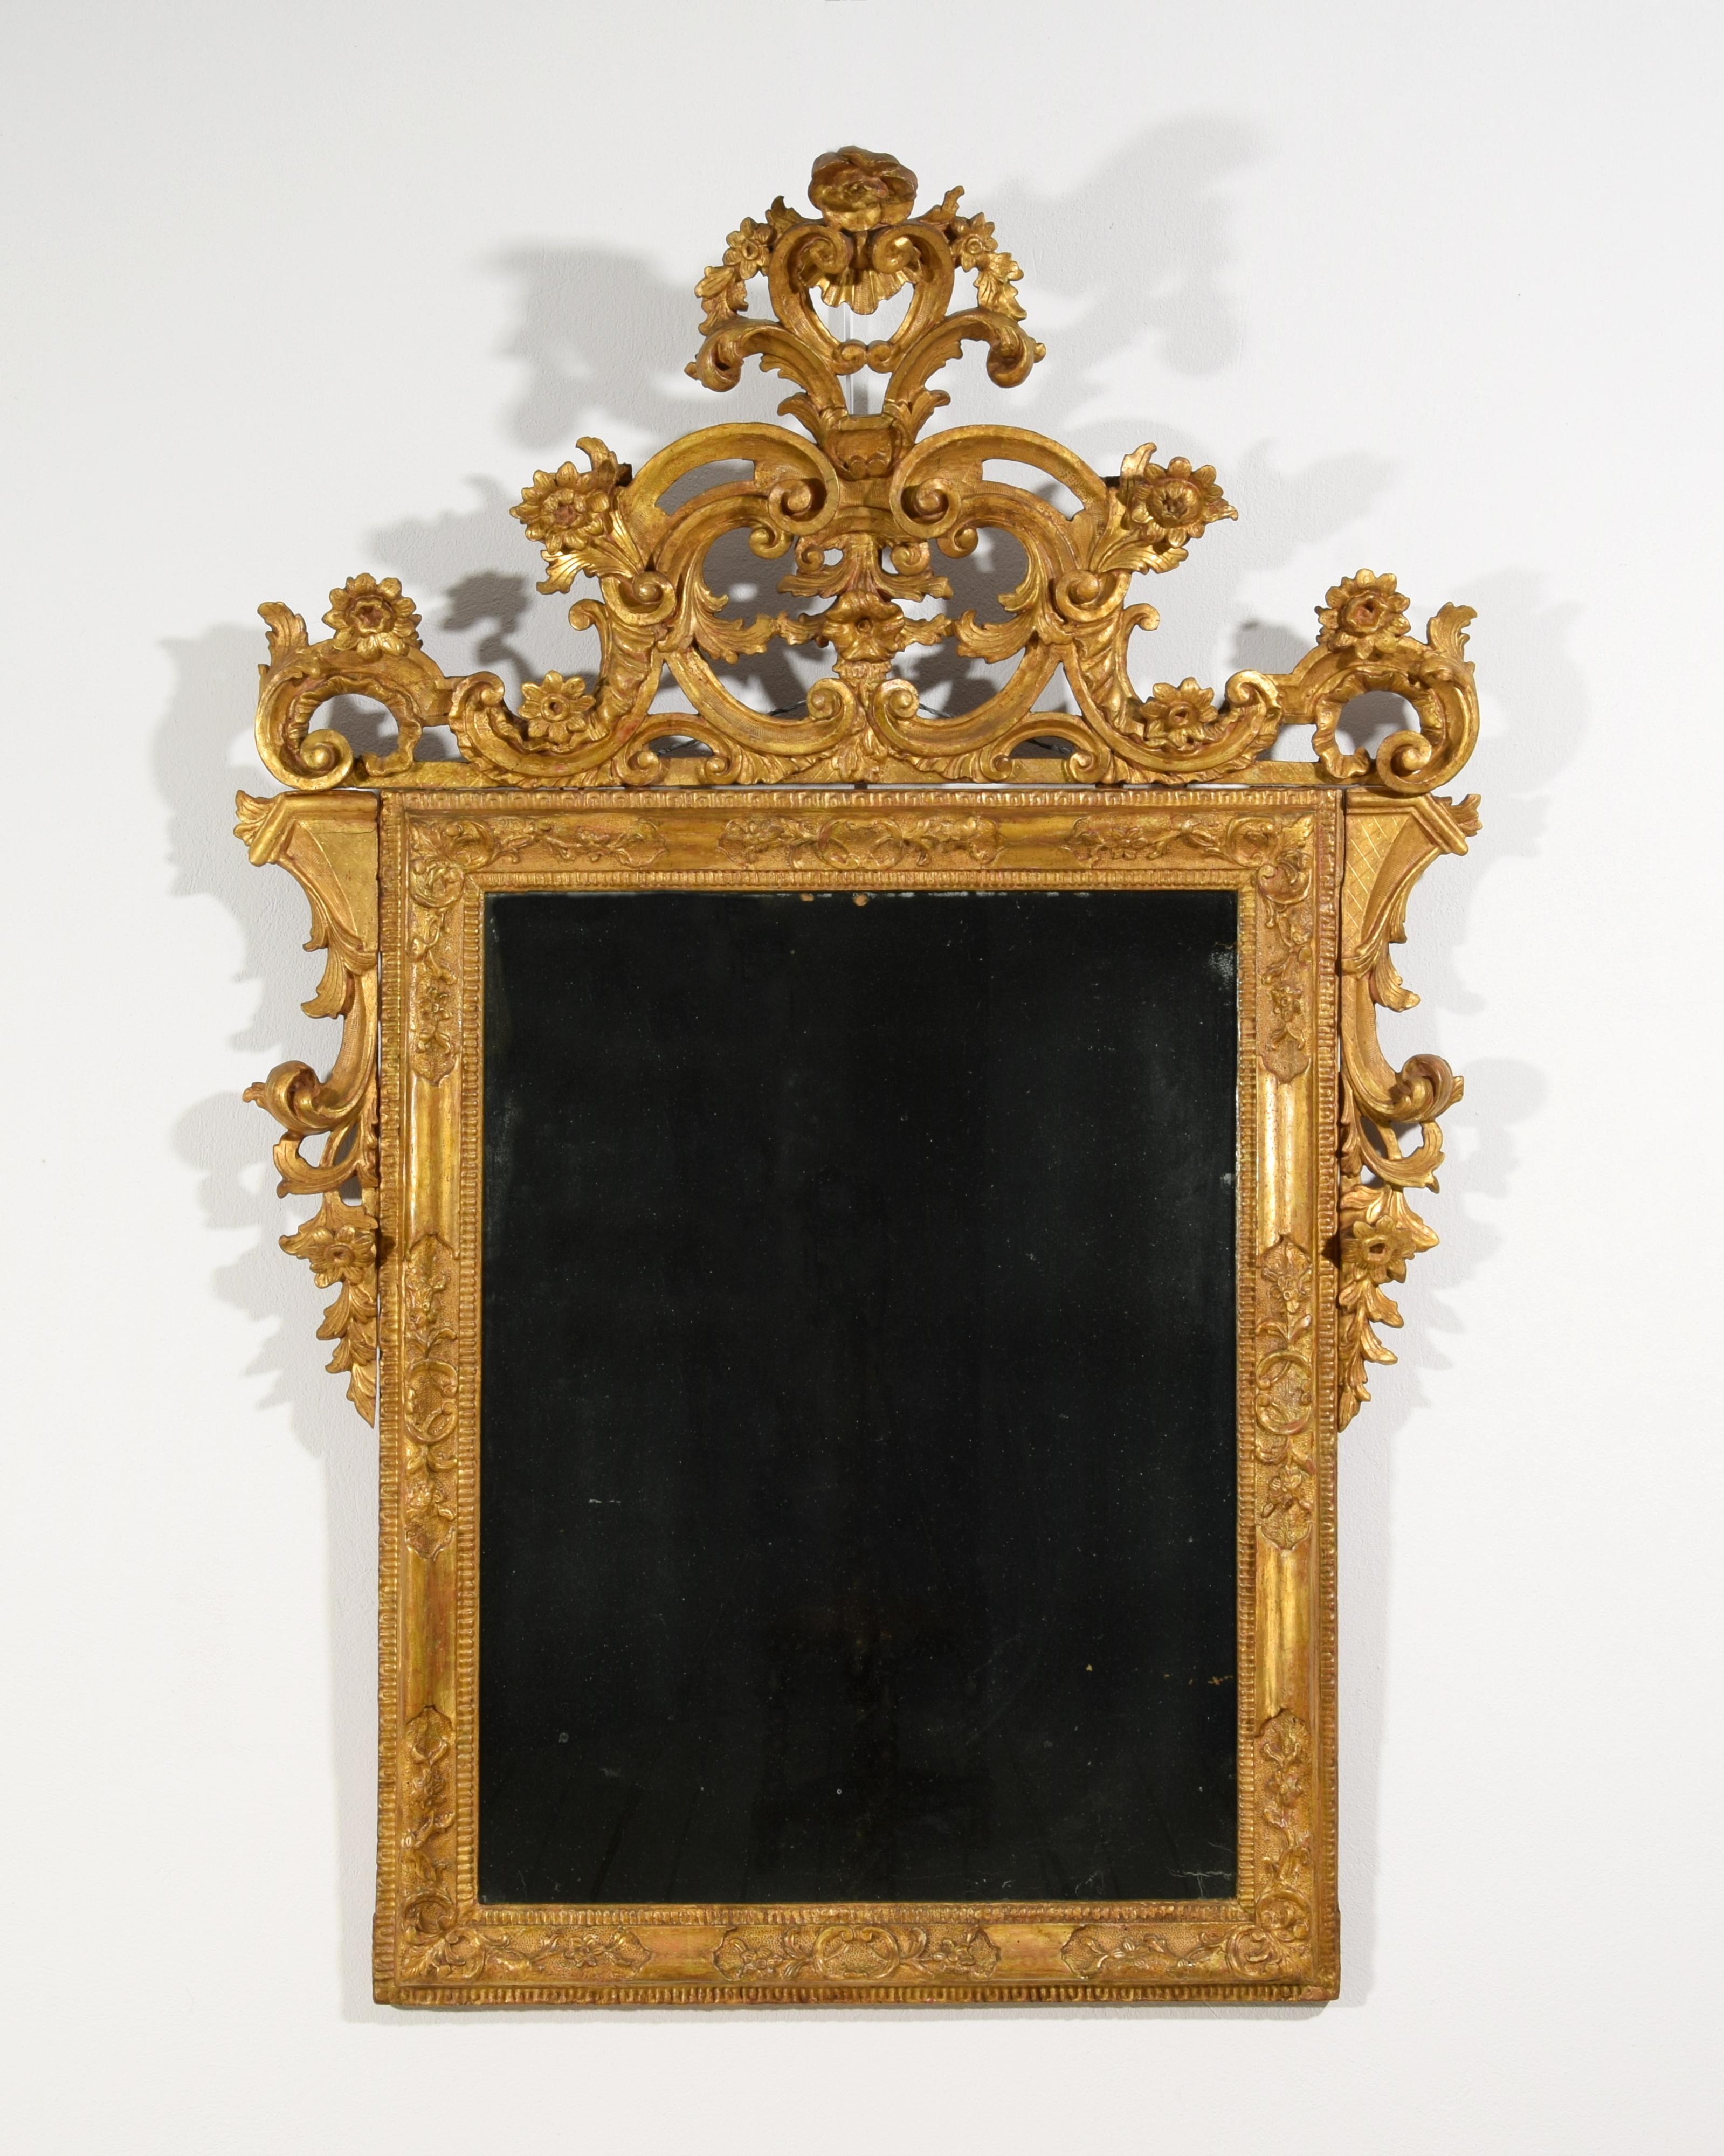 18th century, Venetian Baroque Giltwood mirror 

The refined mirror was made in the Venetian area, Italy, in the 18th century in finely carved and gilded wood.
It has a rectangular frame with floral carvings in relief inside two geometric